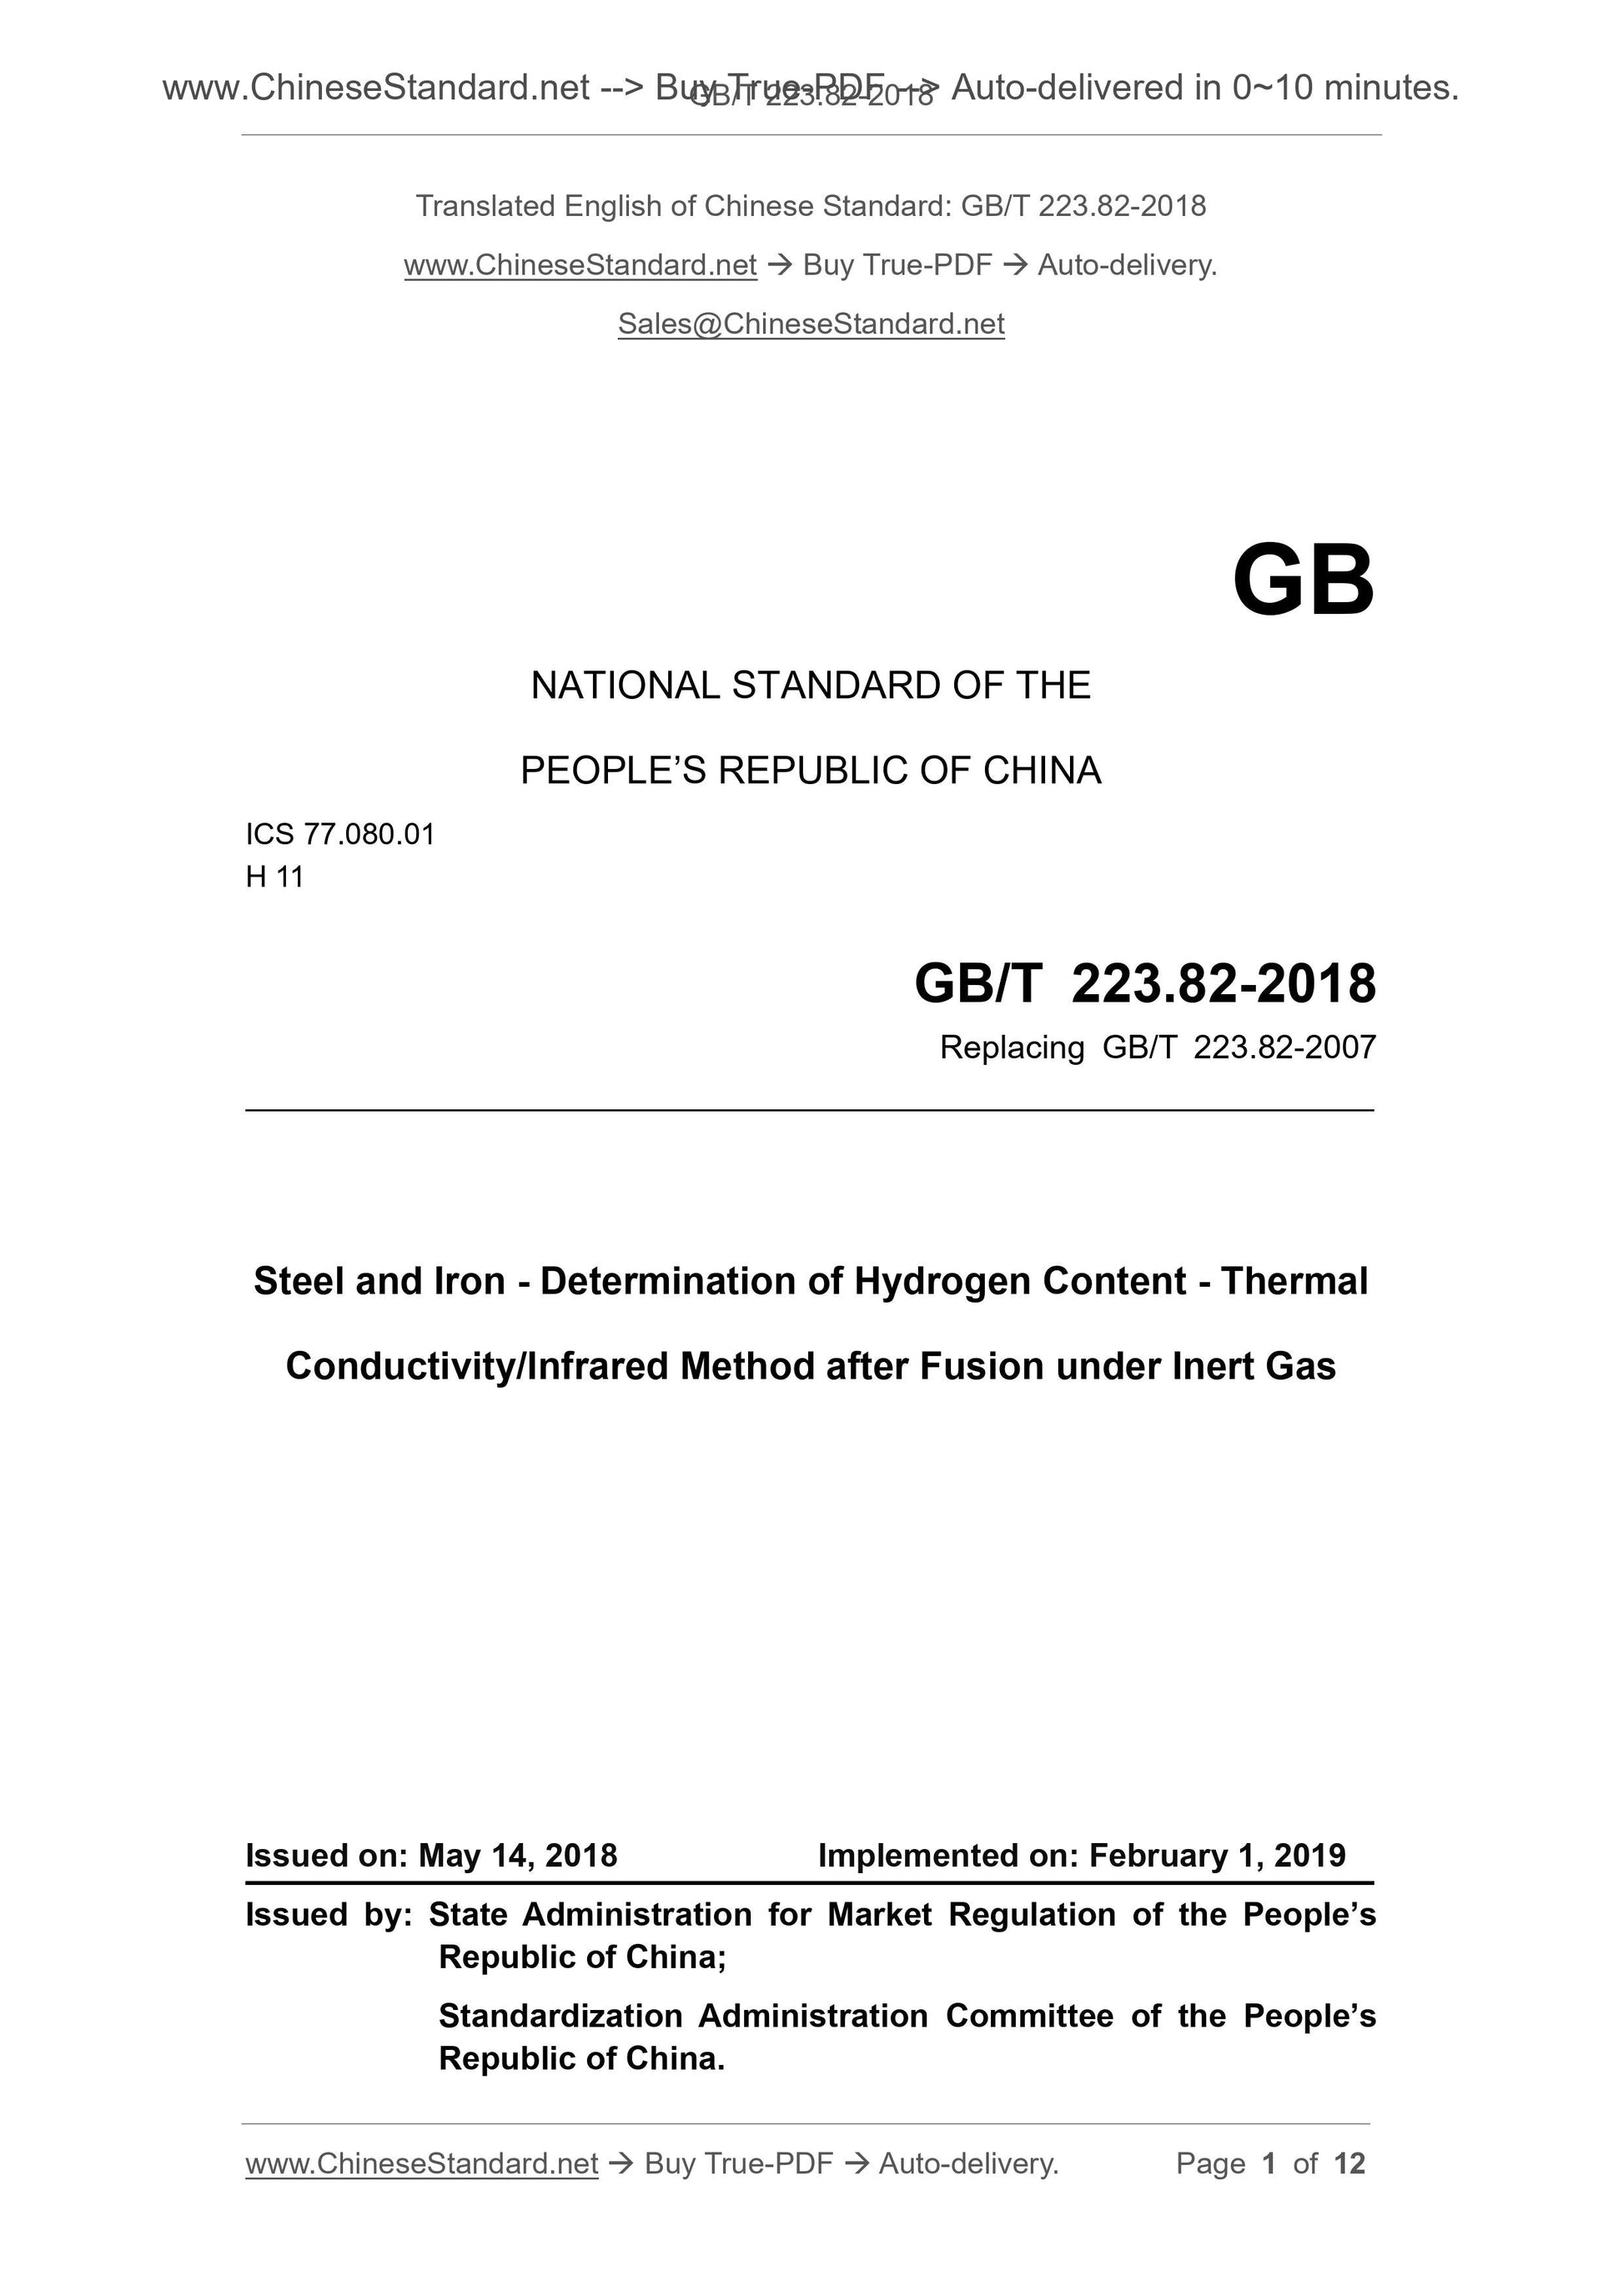 GB/T 223.82-2018 Page 1